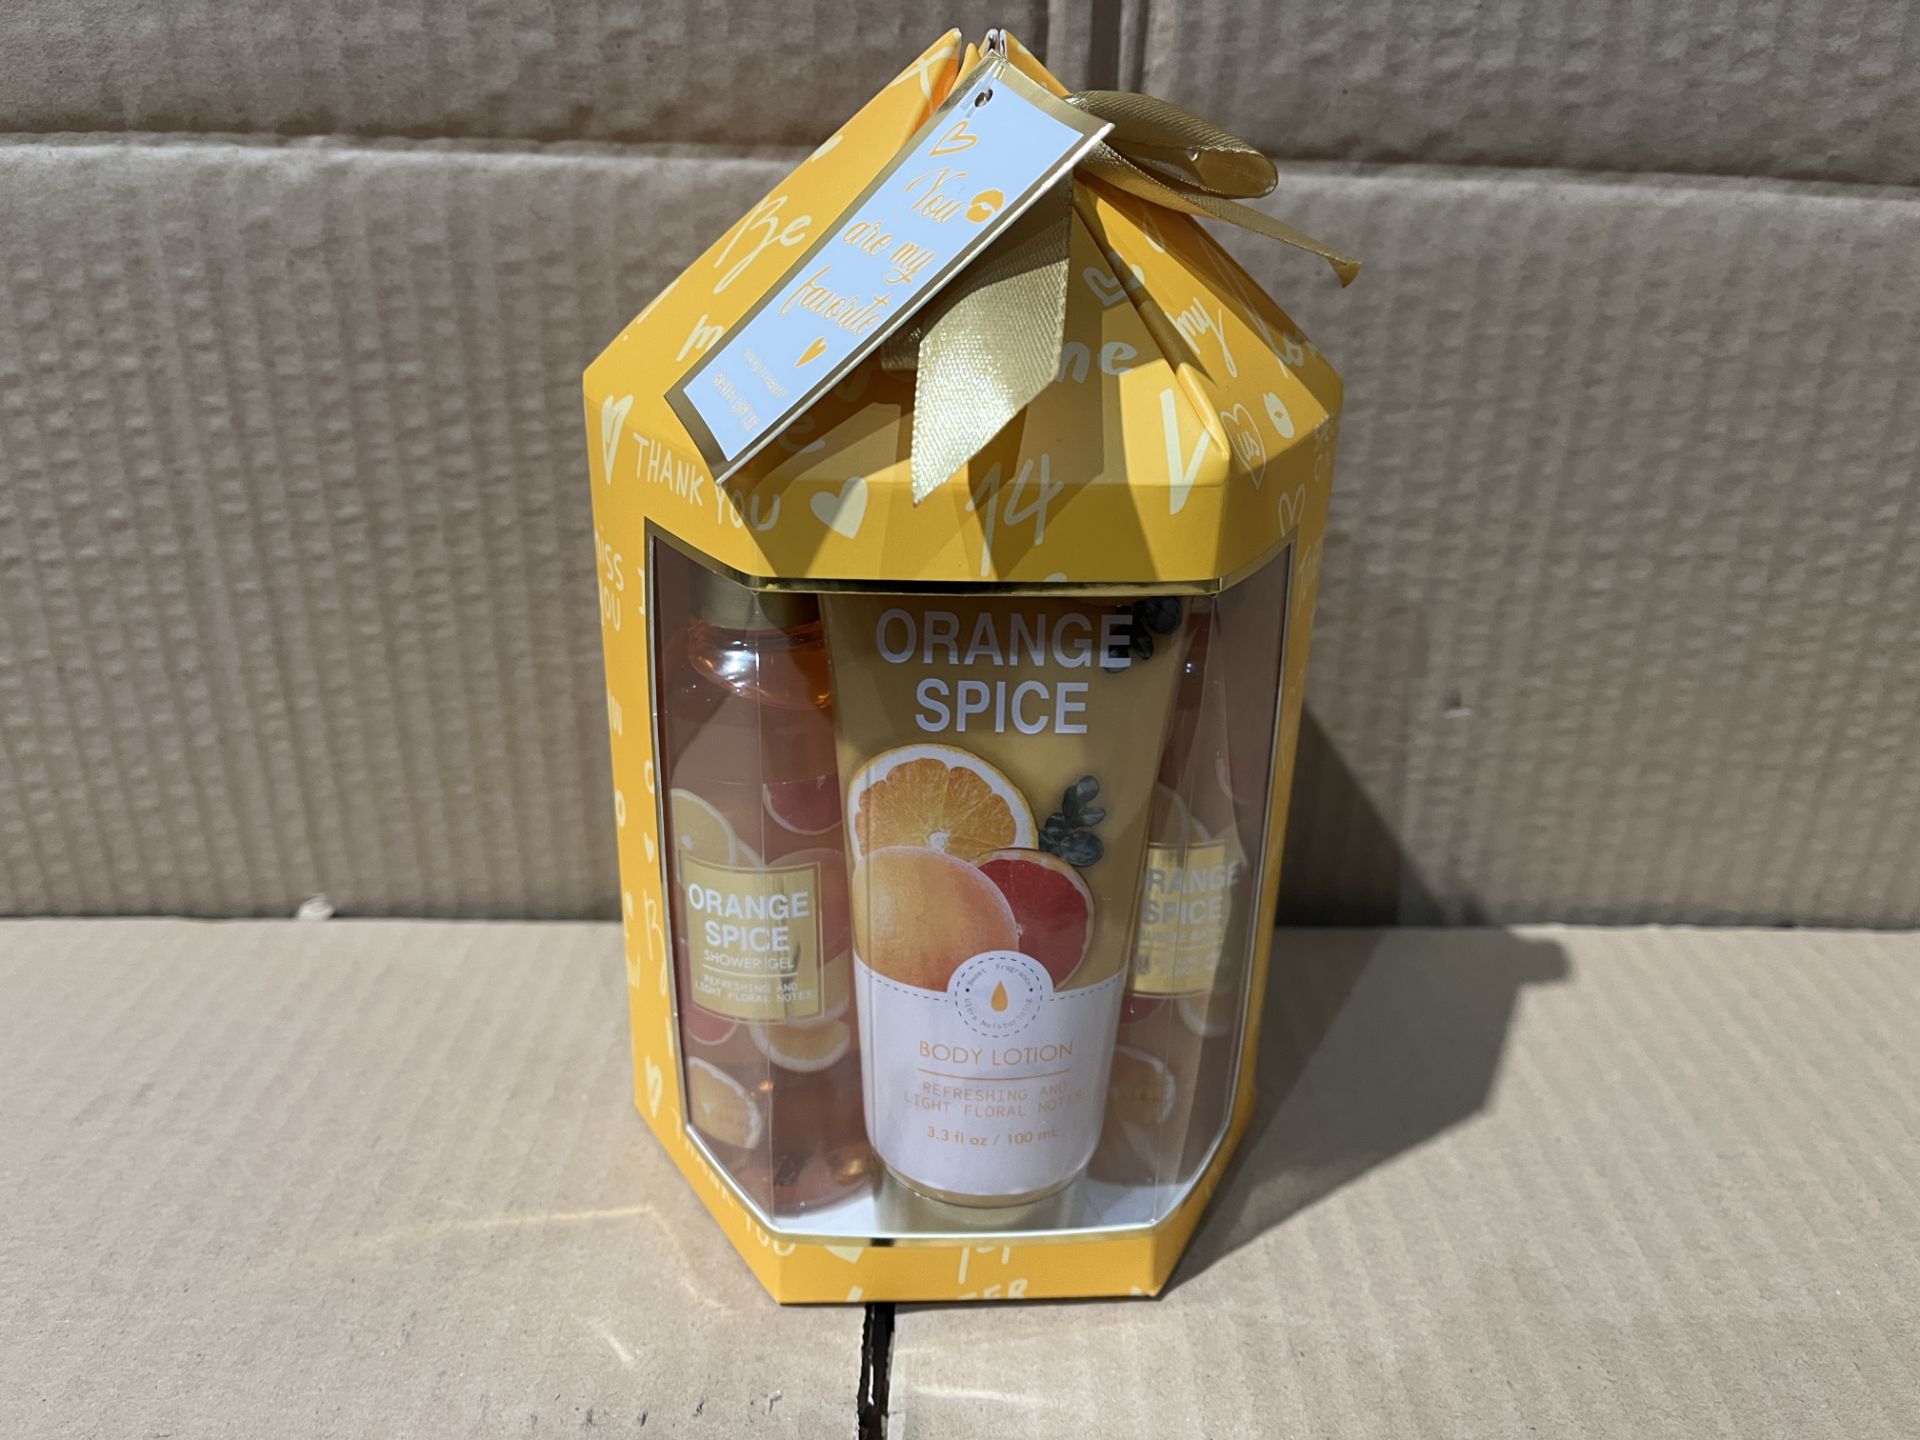 16 X BRAND NEW BODY AND EARTH 3 PIECE ORANGE SPICE GIFT SETS R13-4